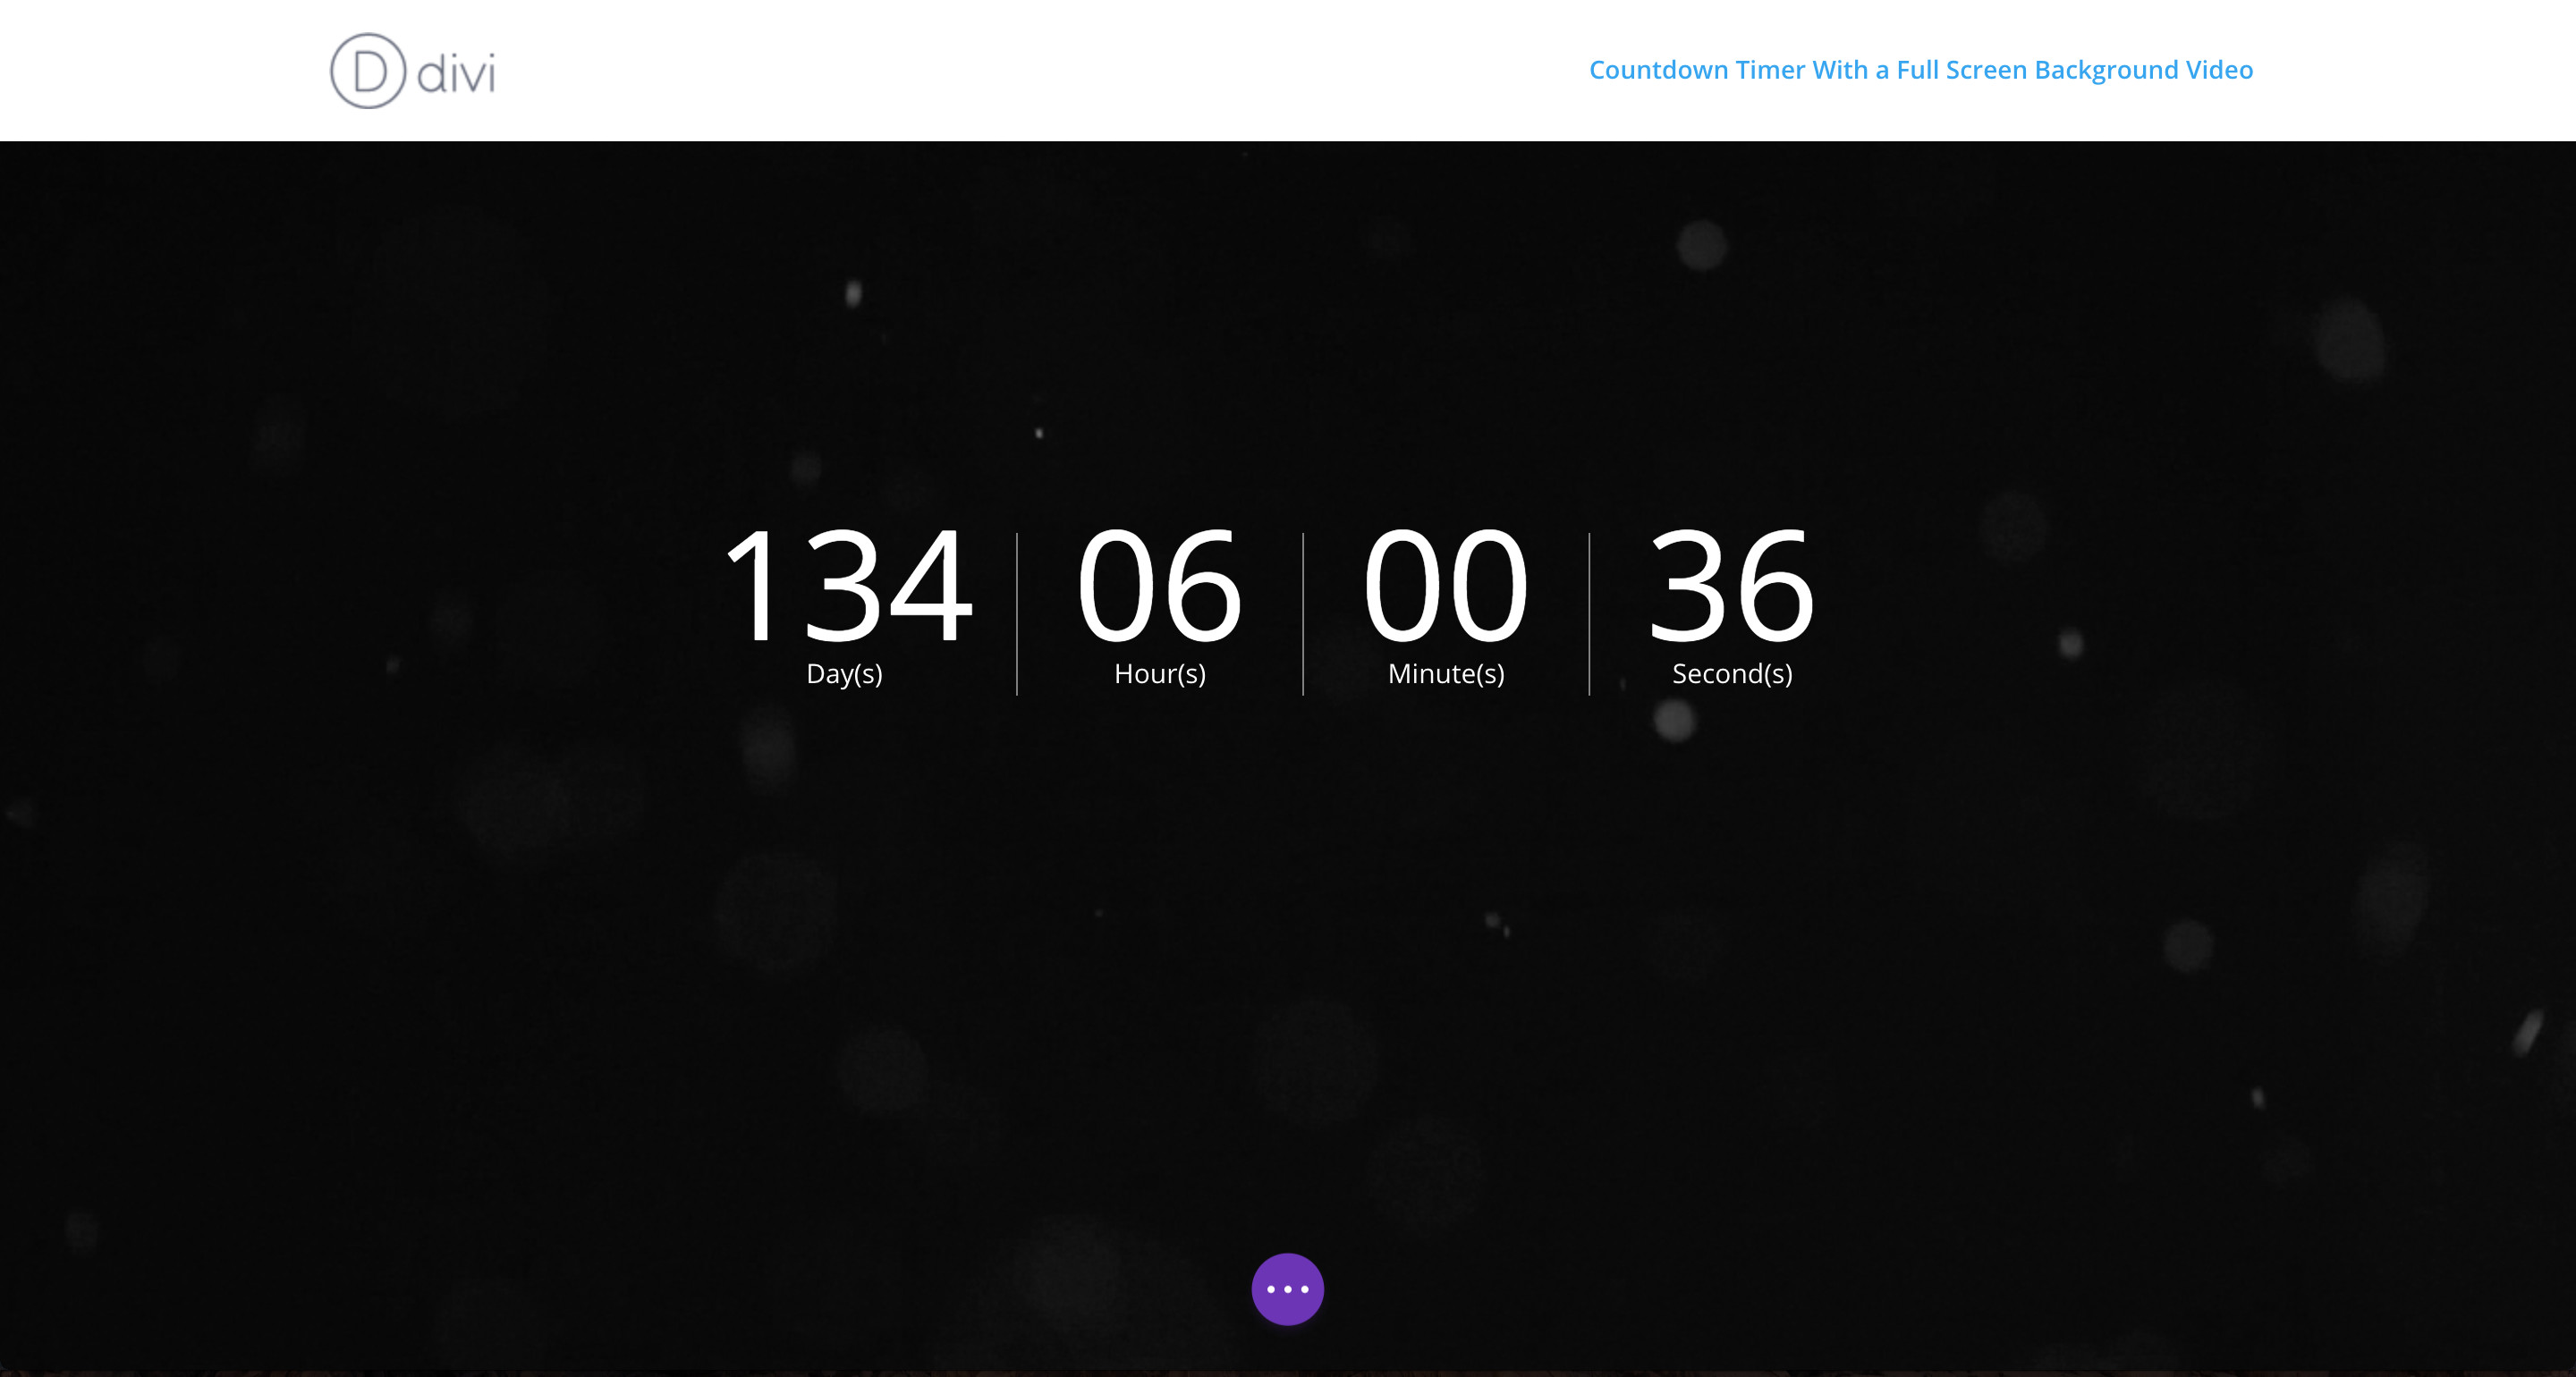 2880x1540 countdown-timer-with-full-screen-background-video-completed